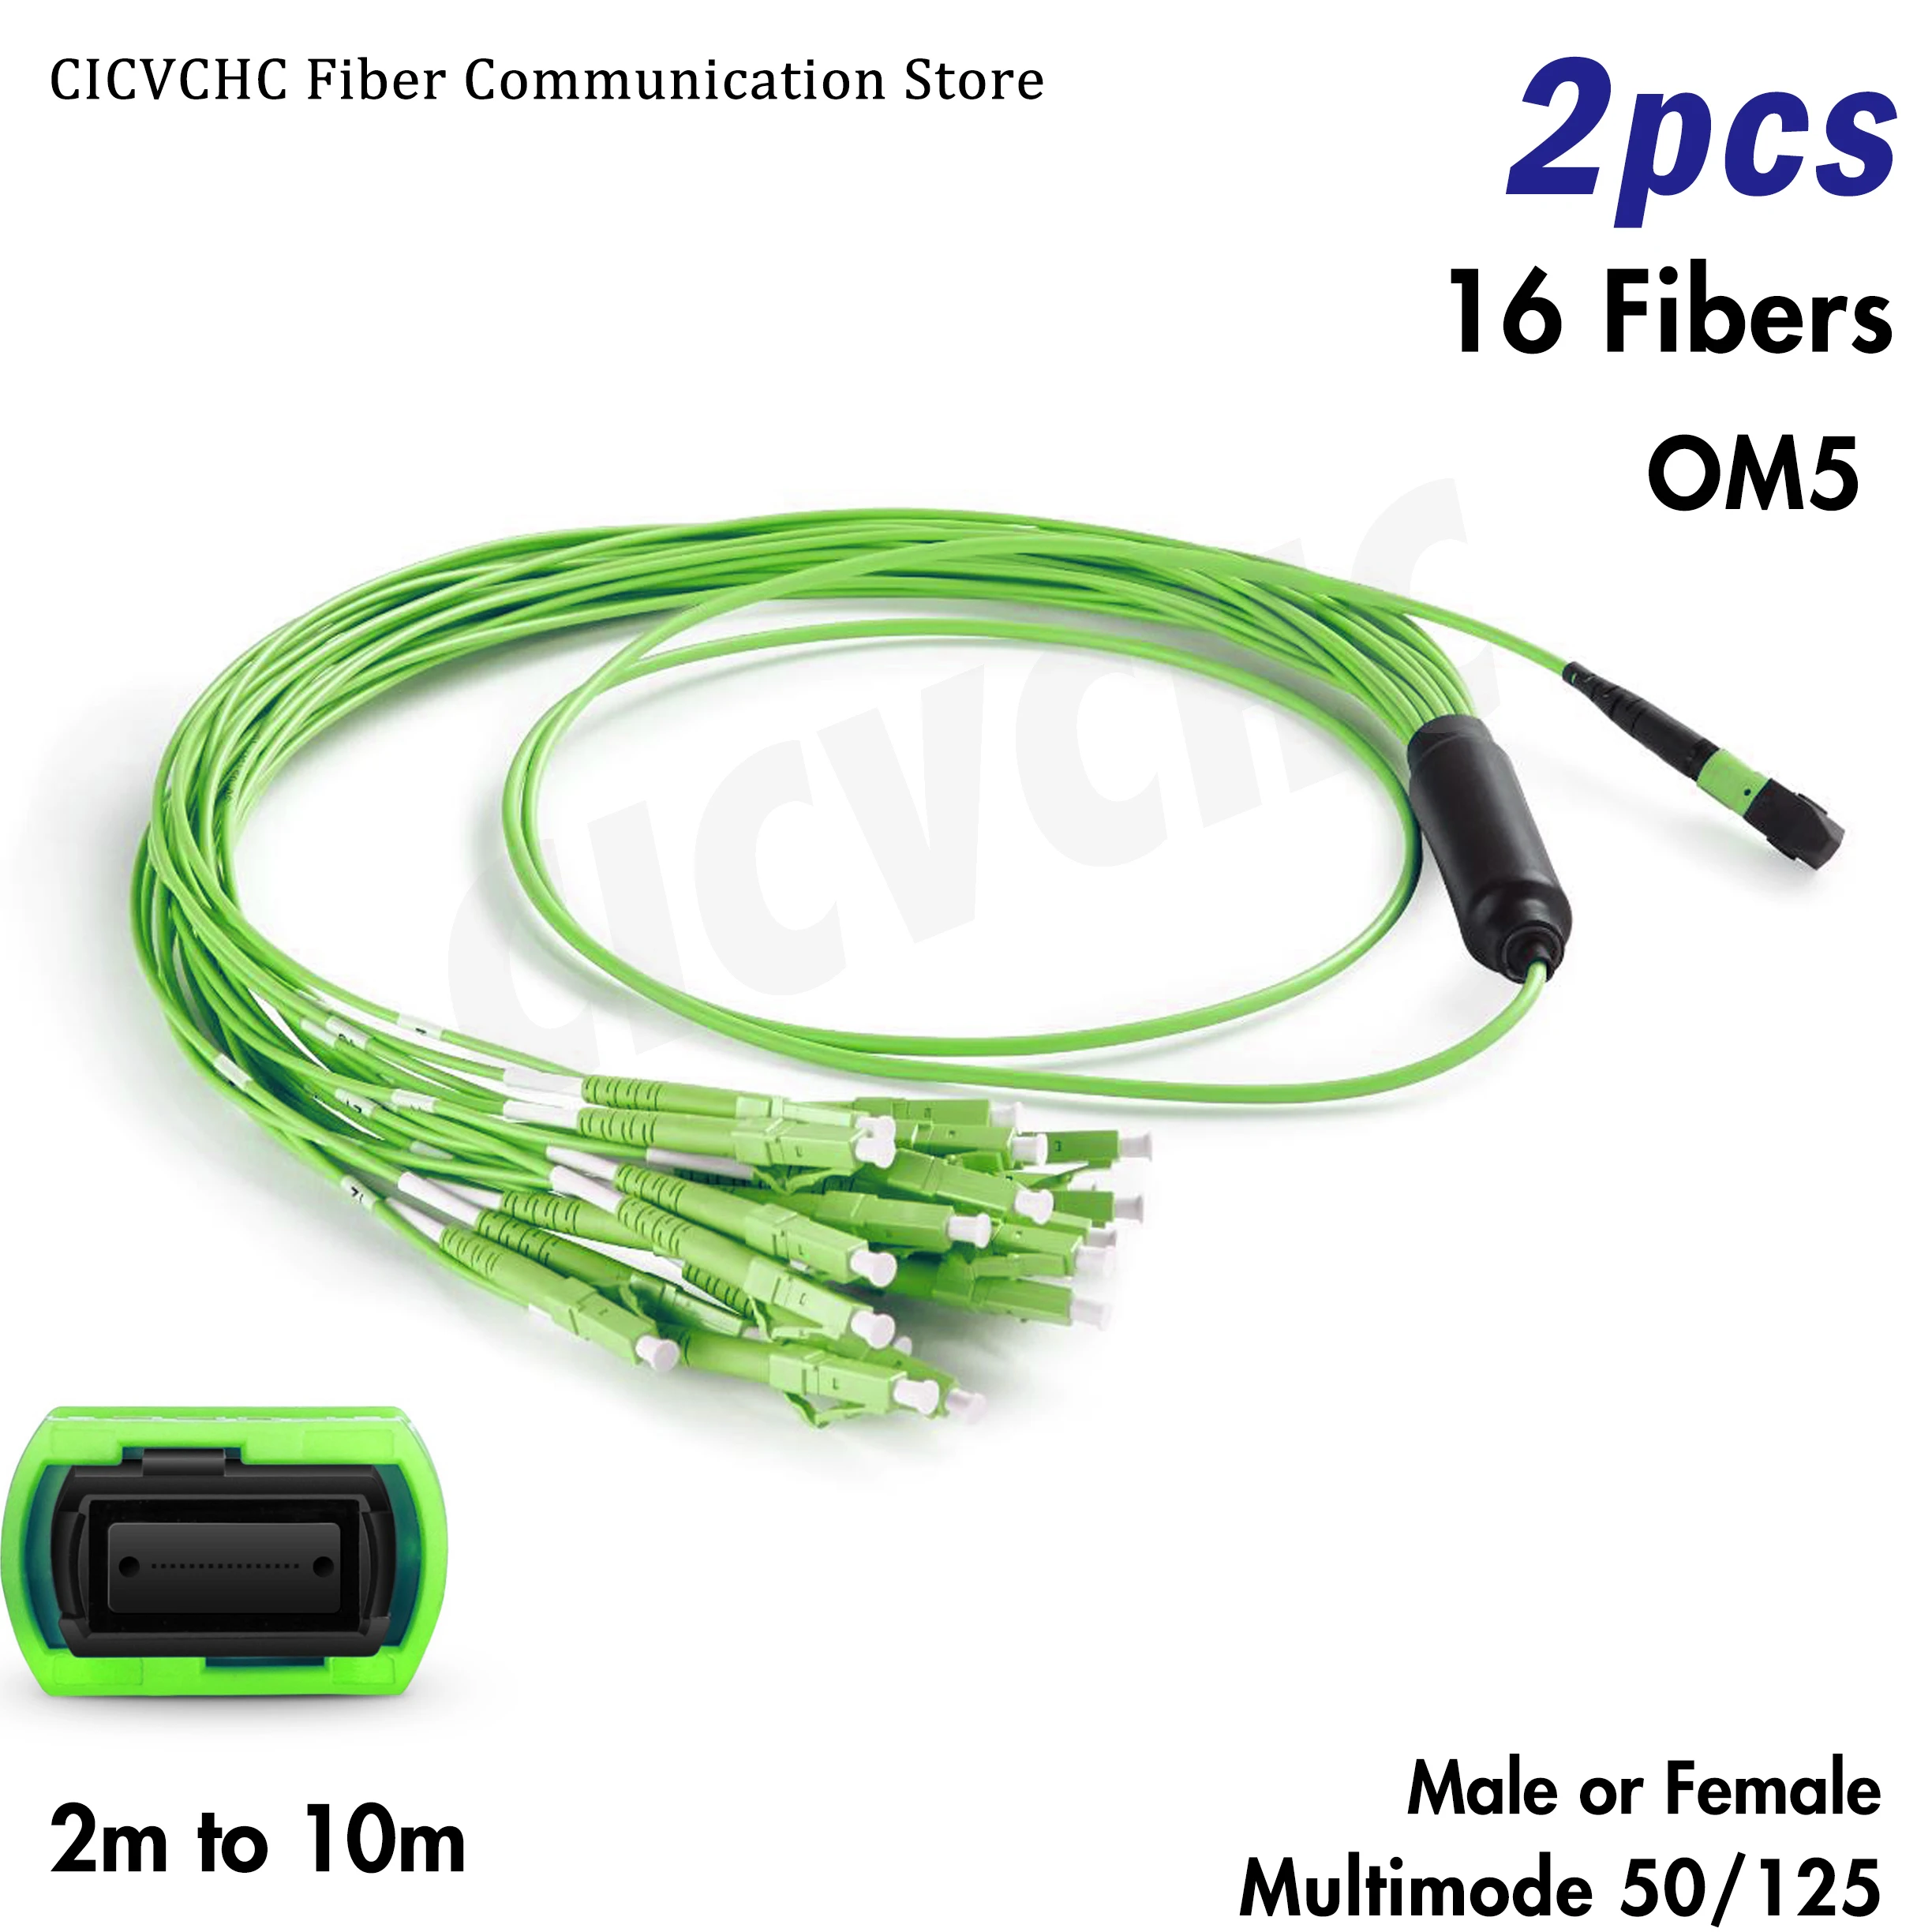 2pcs 16 fibers-MPO/UPC-LC/UPC-OM5-Low Loss-Male/Female with 2.0mm Fanout-2m to 10m/MPO Assembly